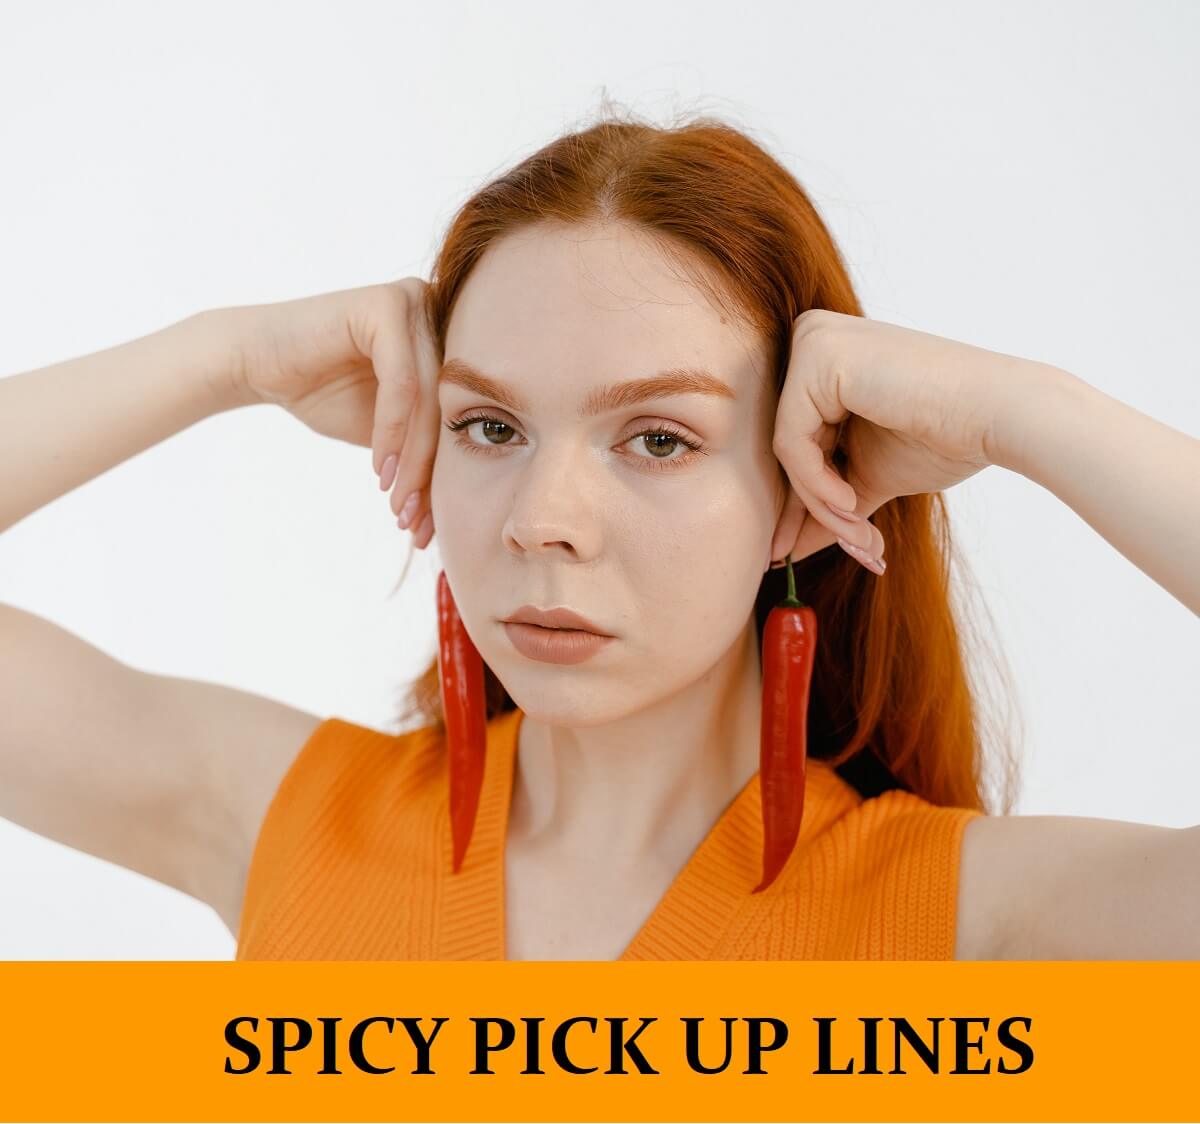 Pick Up Lines About Spicy Food